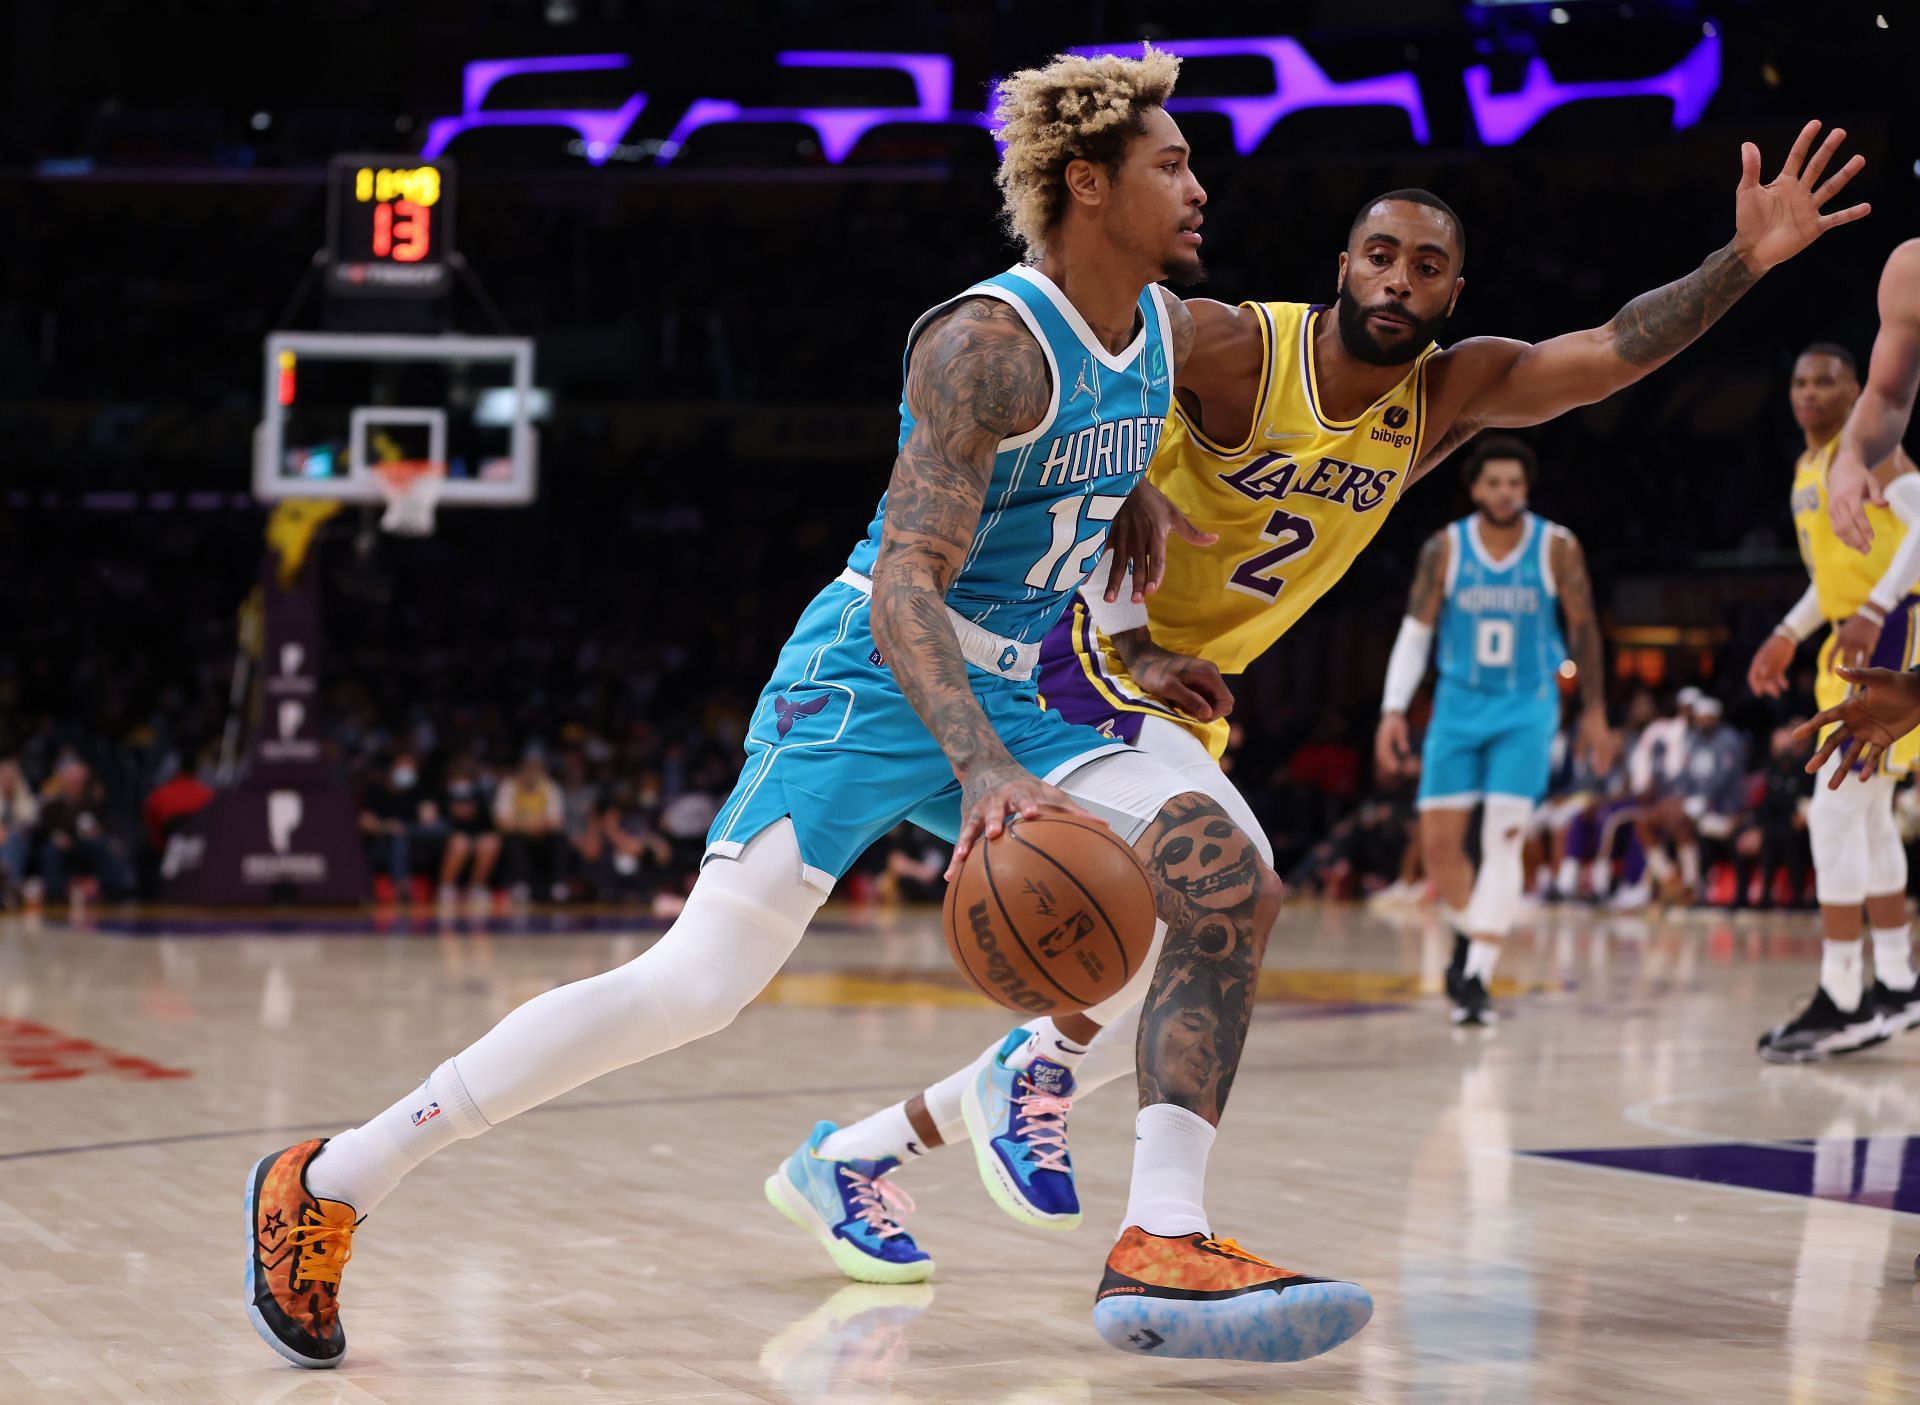 The Charlotte Hornets will host the LA Lakers on January 28th.